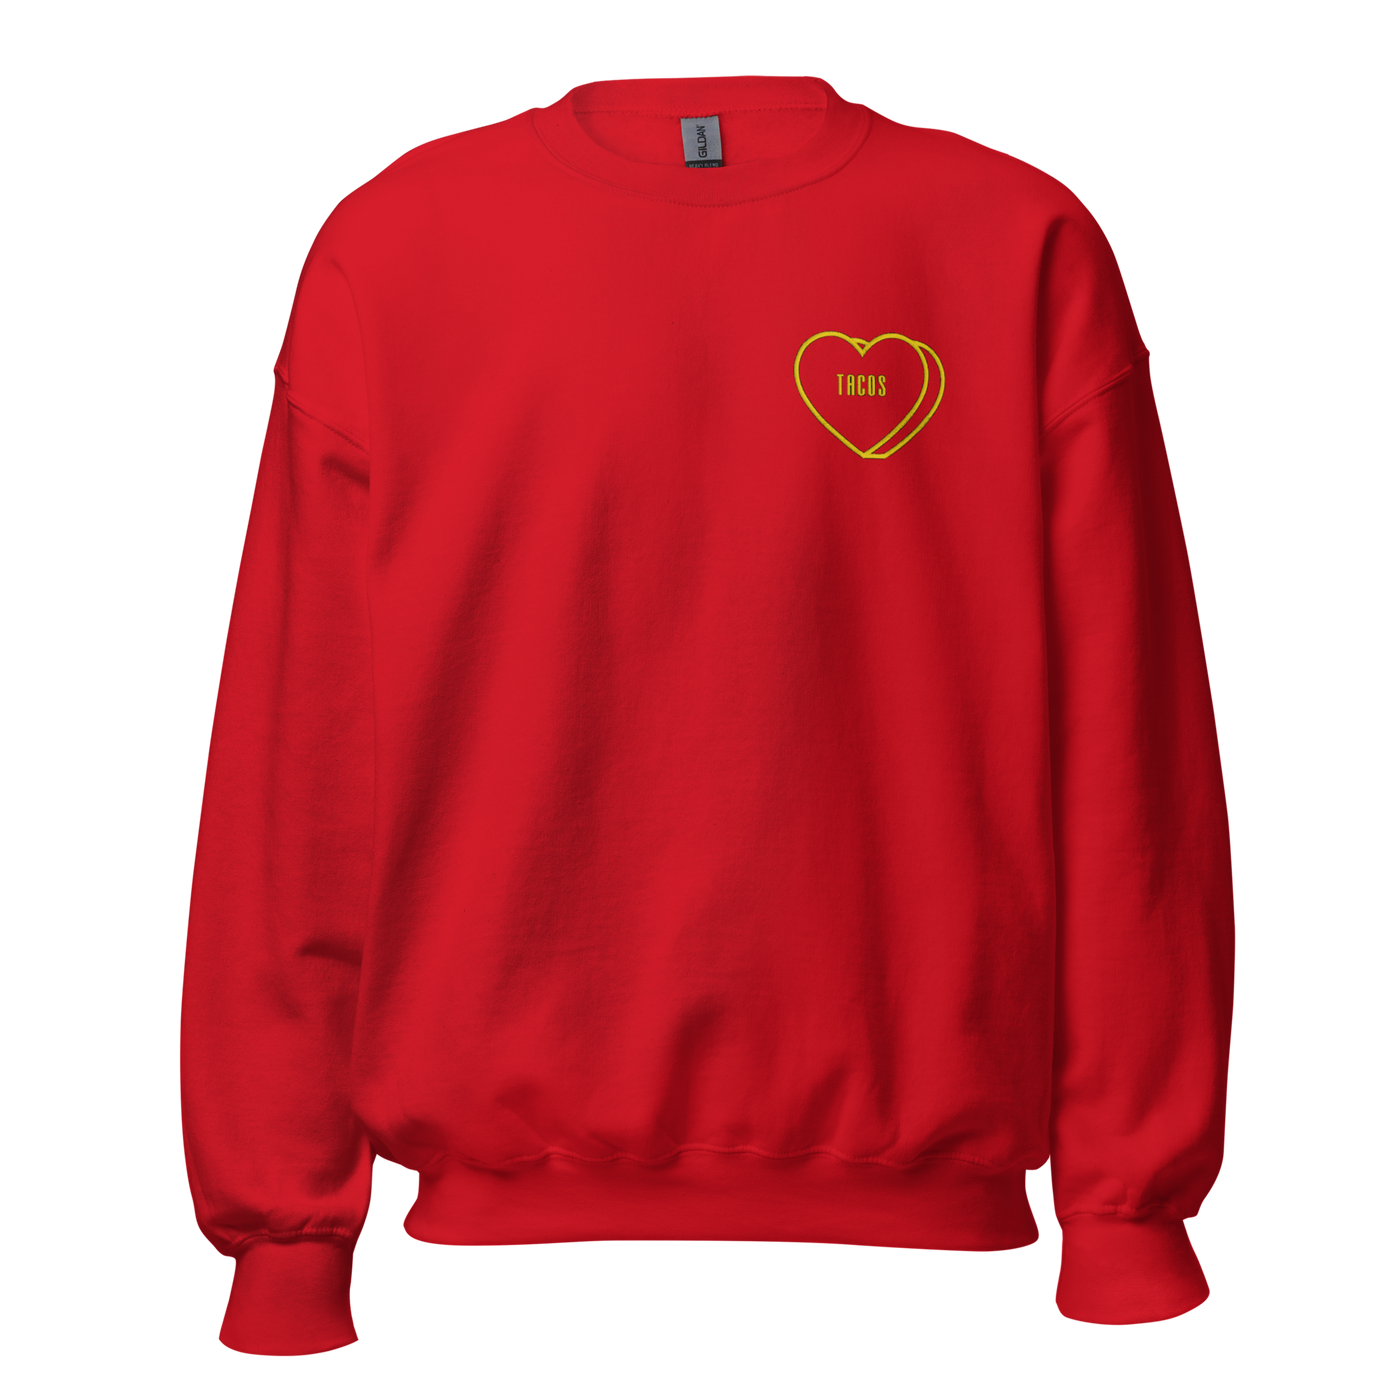 Make It Yours™ 'Candy Heart' Embroidered Sweatshirt